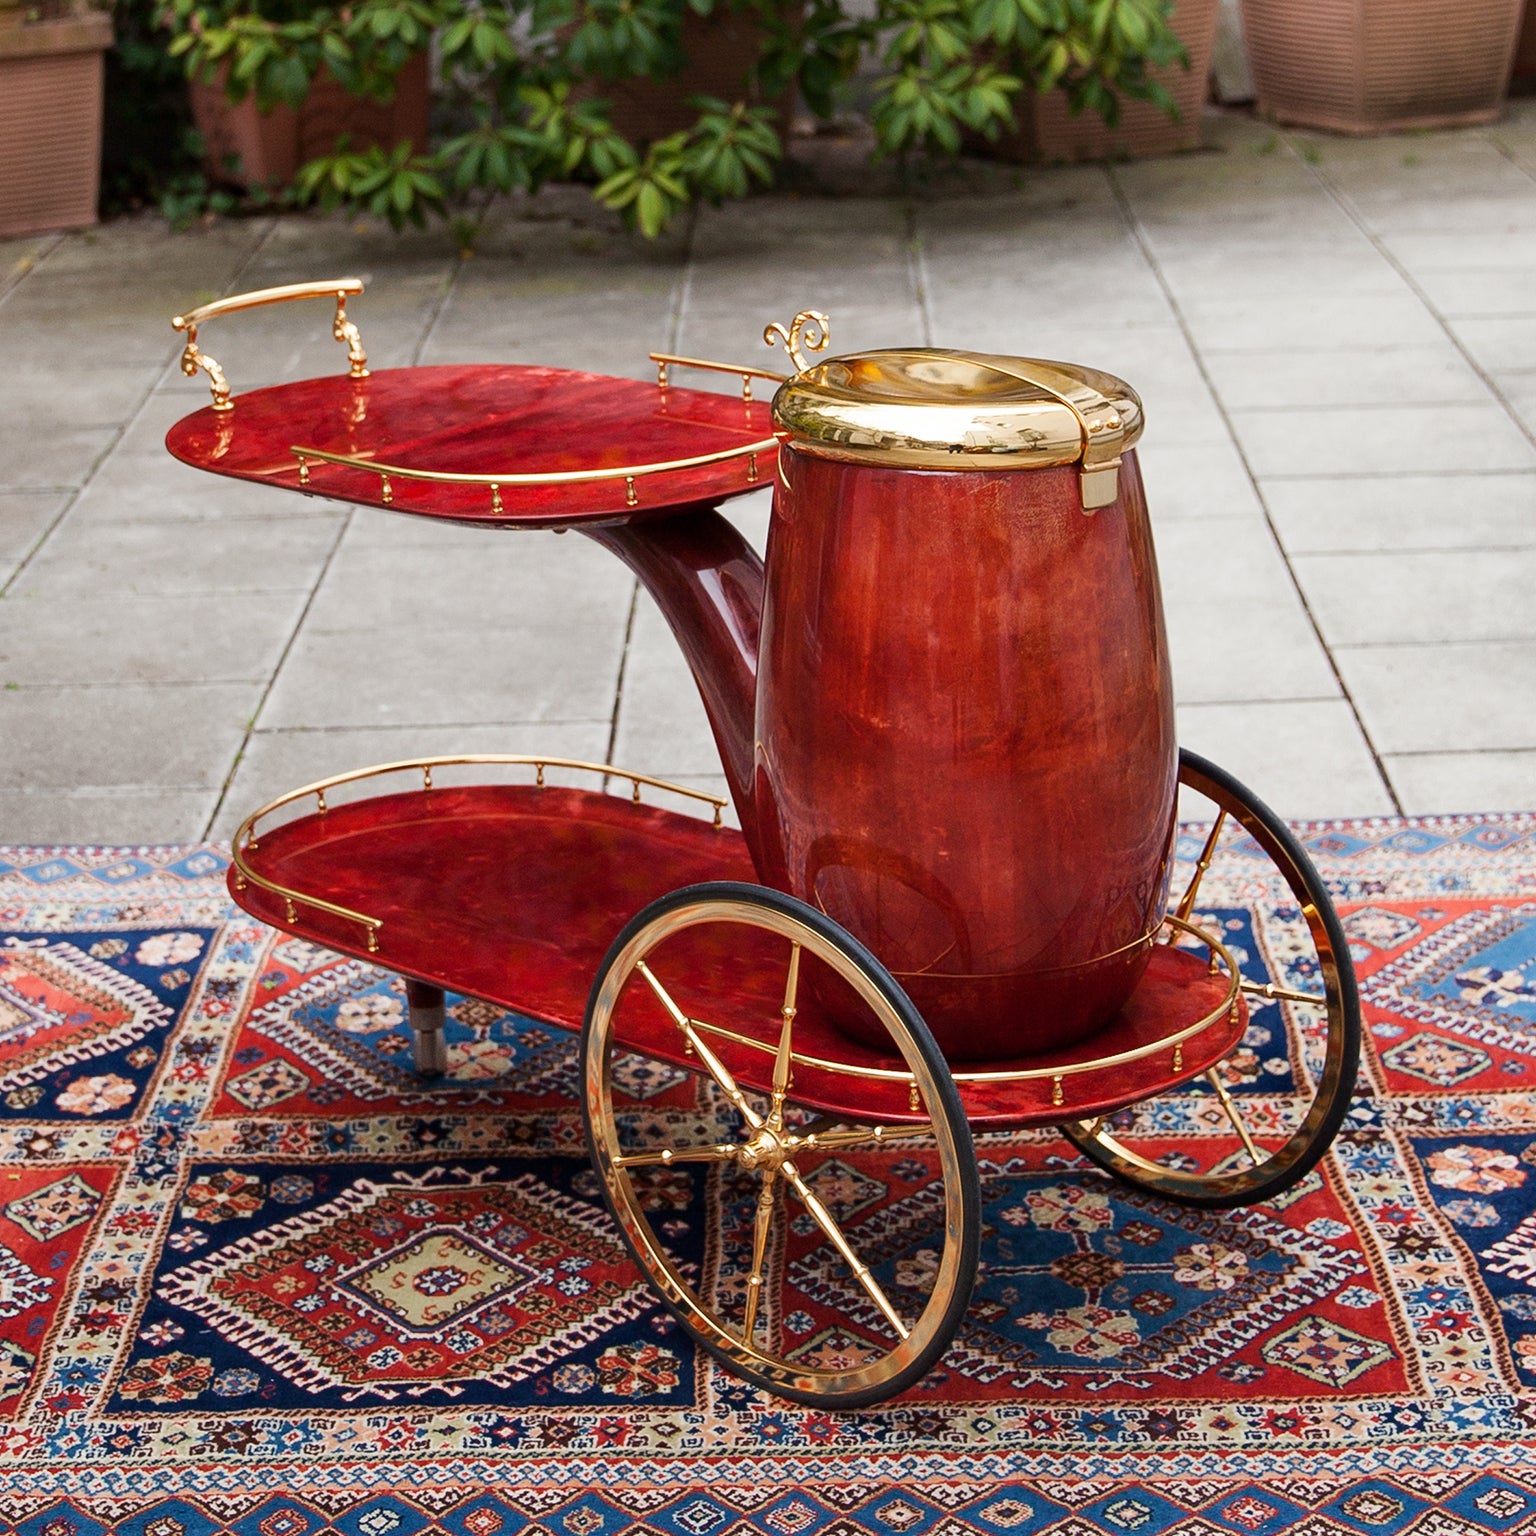 Aldo Tura bar cart in form of a pipe, lacquered in red goatskin with golden brass applications and a huge container as champagne or wine cooler.
Following the idea of Rene Magritte. 
One of the most recognized designs by Aldo Tura. an icon!
This